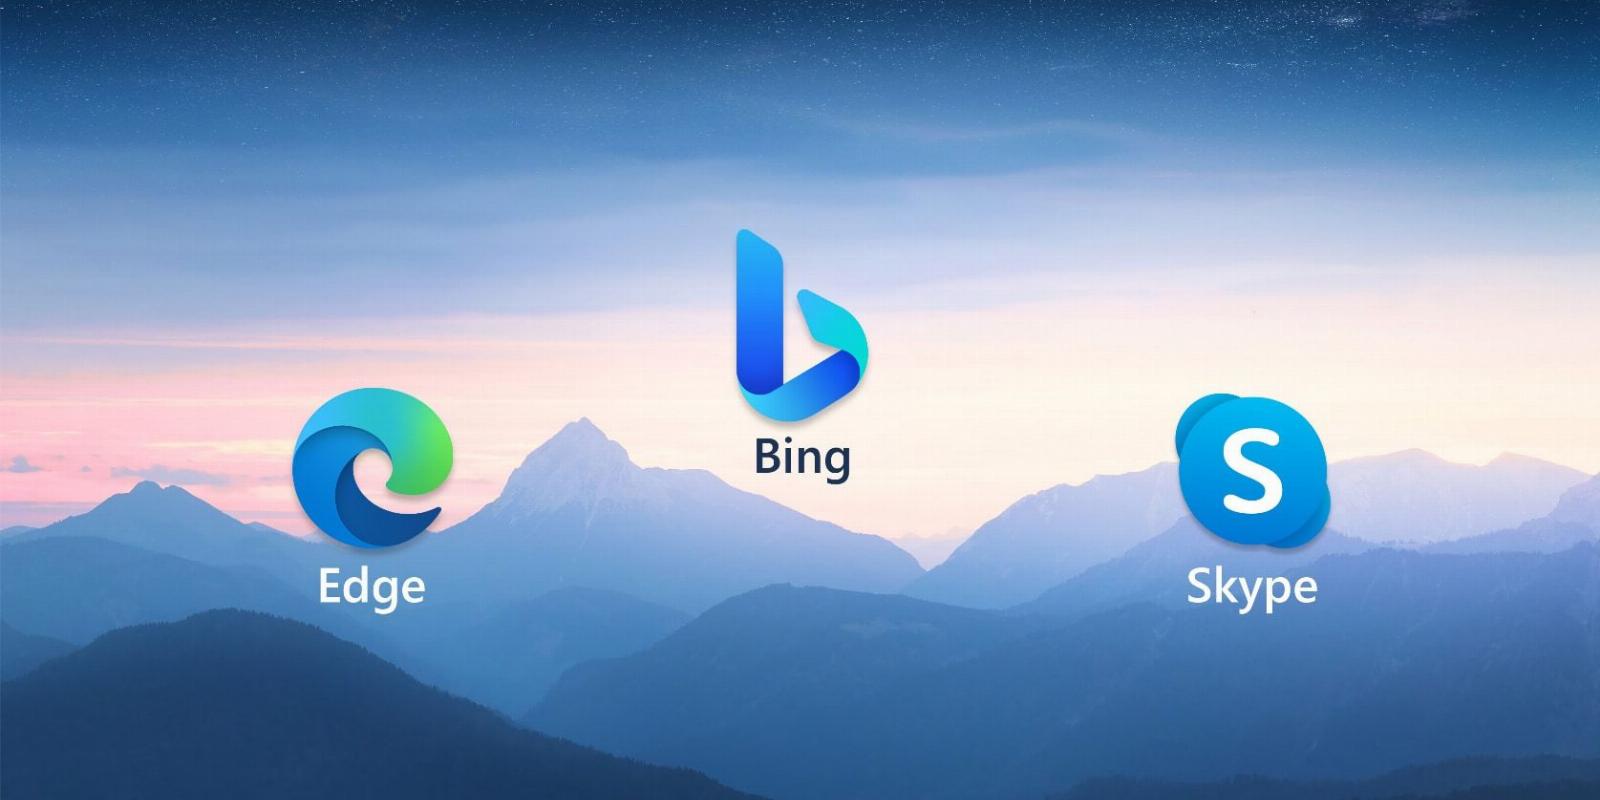 You Can Now Use Bing’s AI-Powered Search on Android and iOS